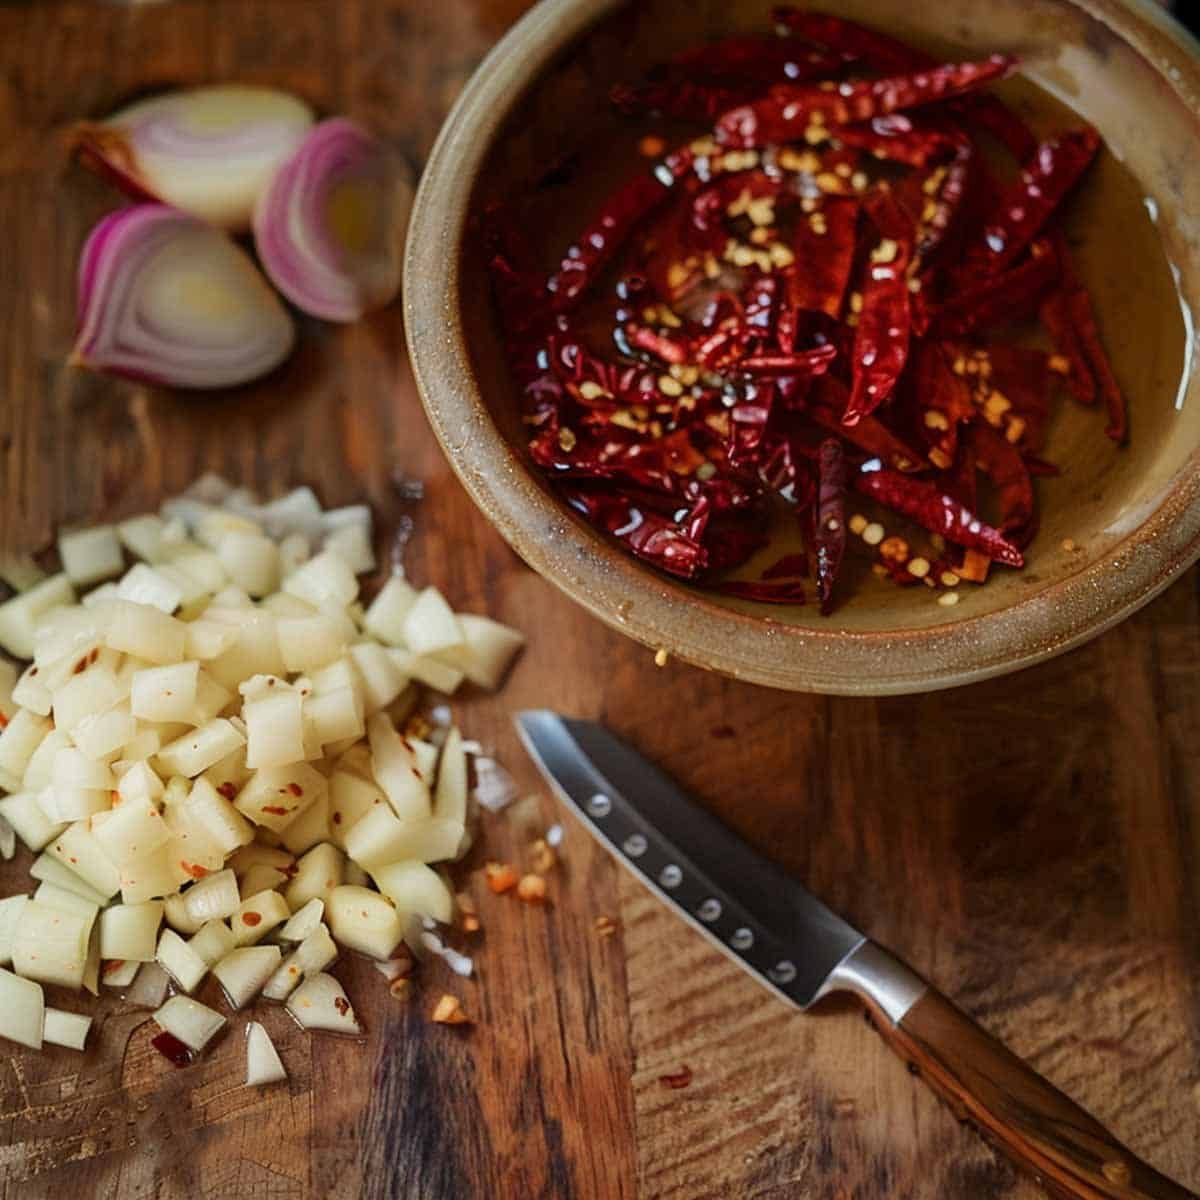 Dried chili peppers soak in a bowl next to freshly cut shallots, set for making Nam Prik Pao, a Thai chili paste.